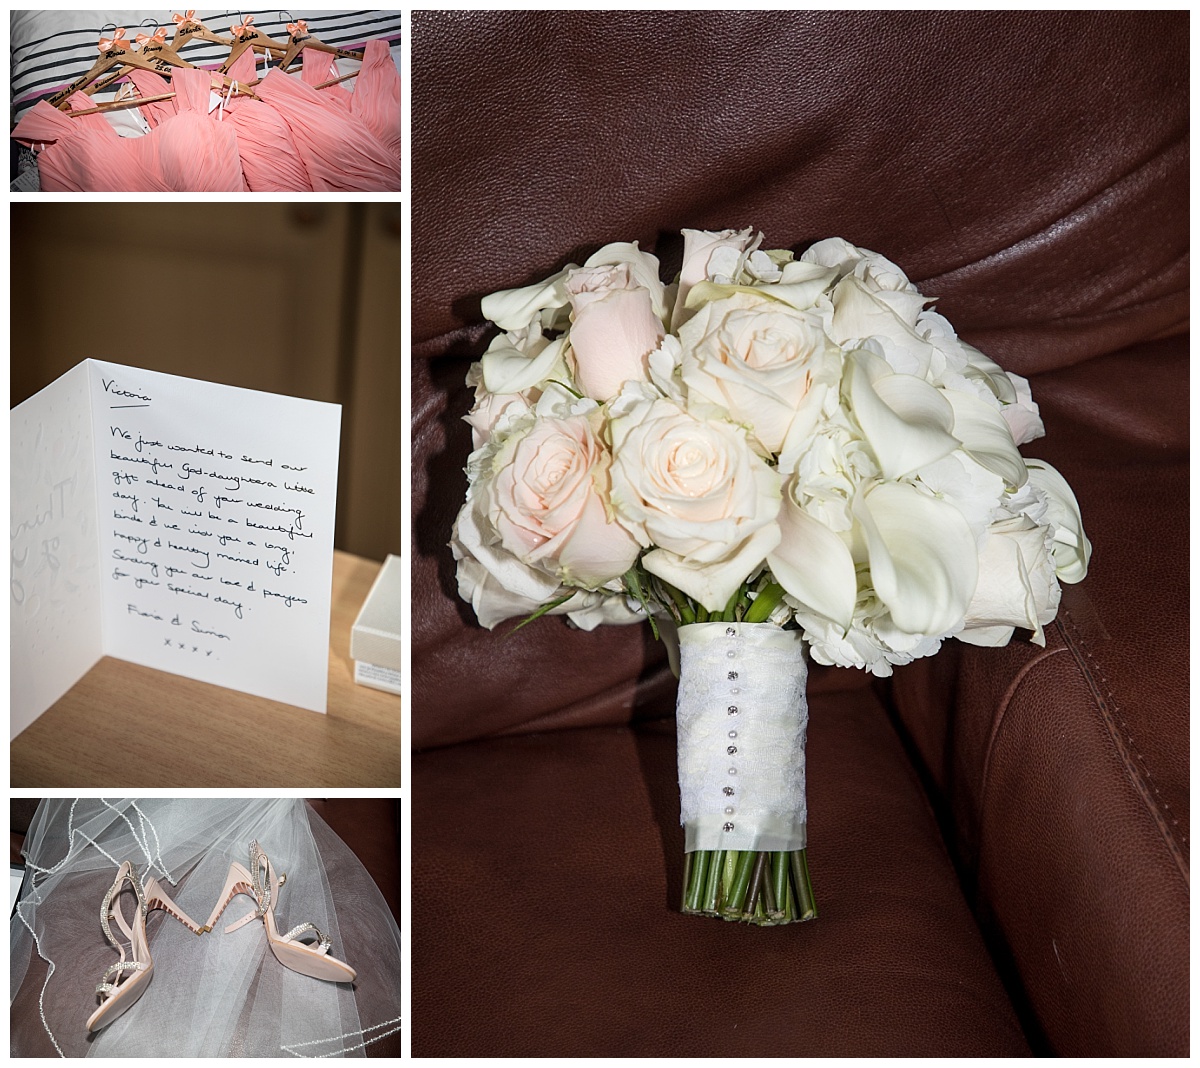 Wedding Photography Manchester - Victoria and Phillips Shireburn Arms wedding 4